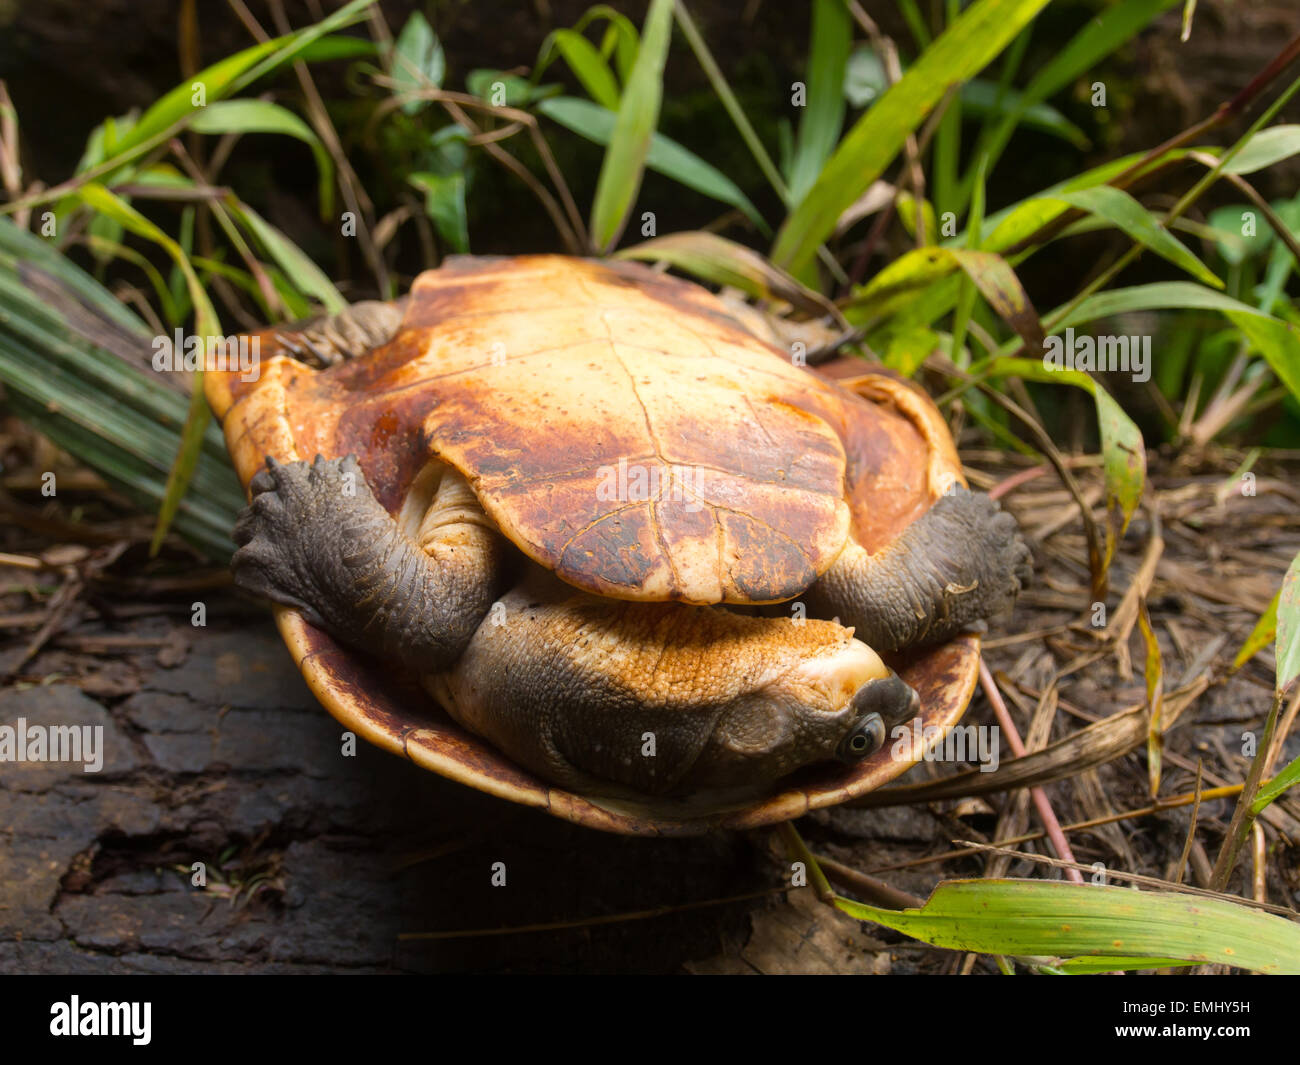 Wild turtle caught in the jungle laying upside down. Stock Photo